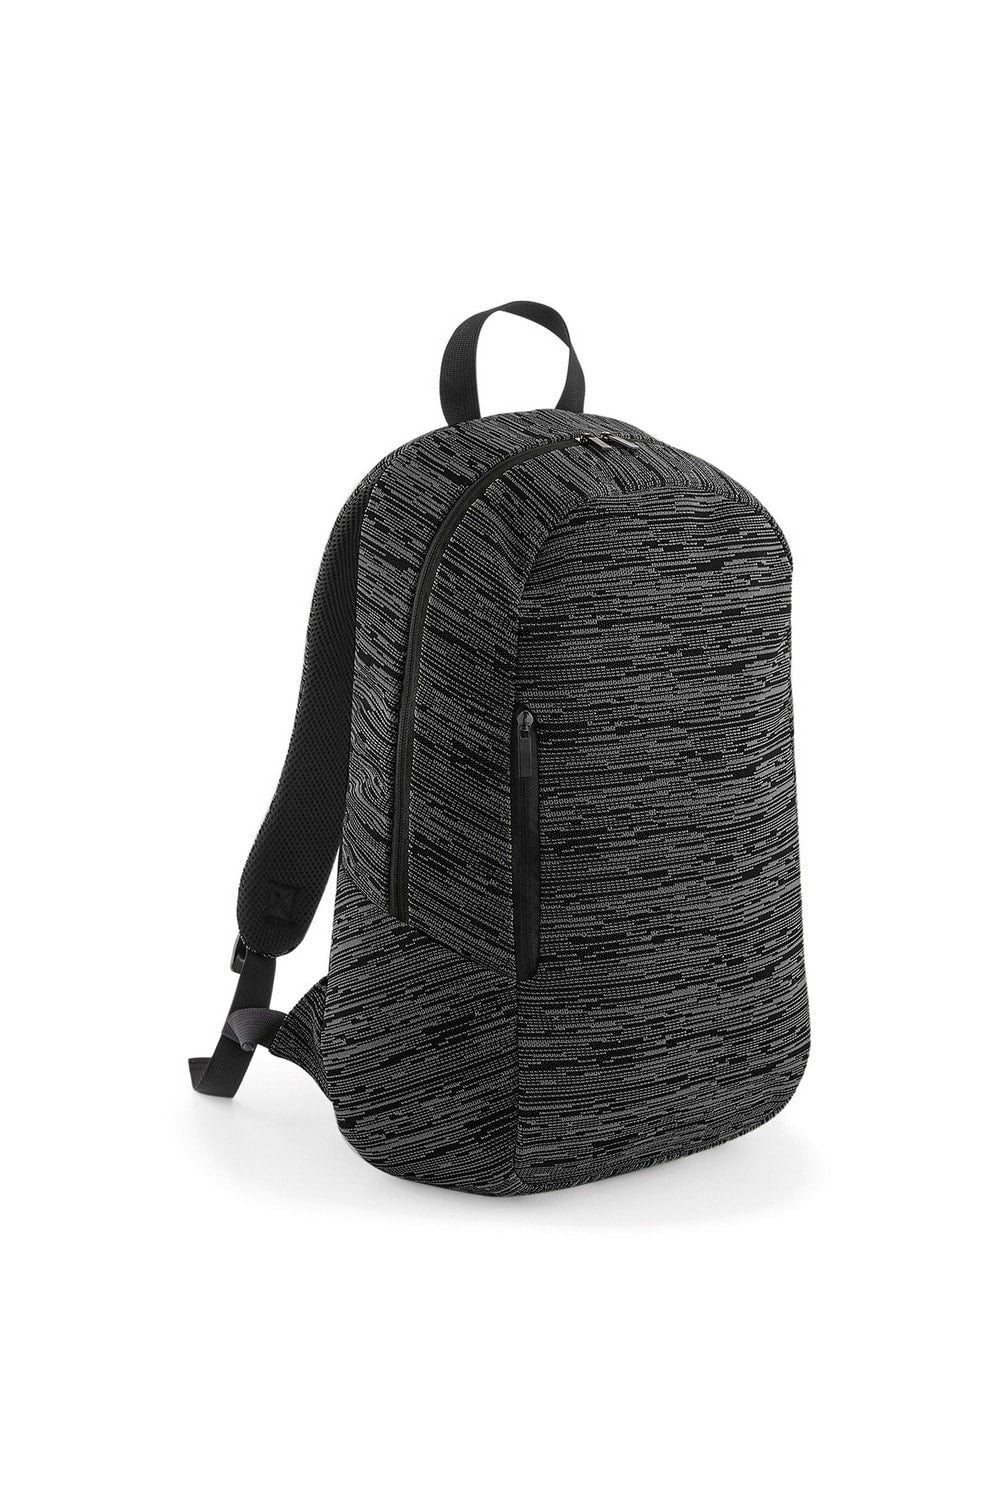 Duo Knit Backpack - Gray/Black